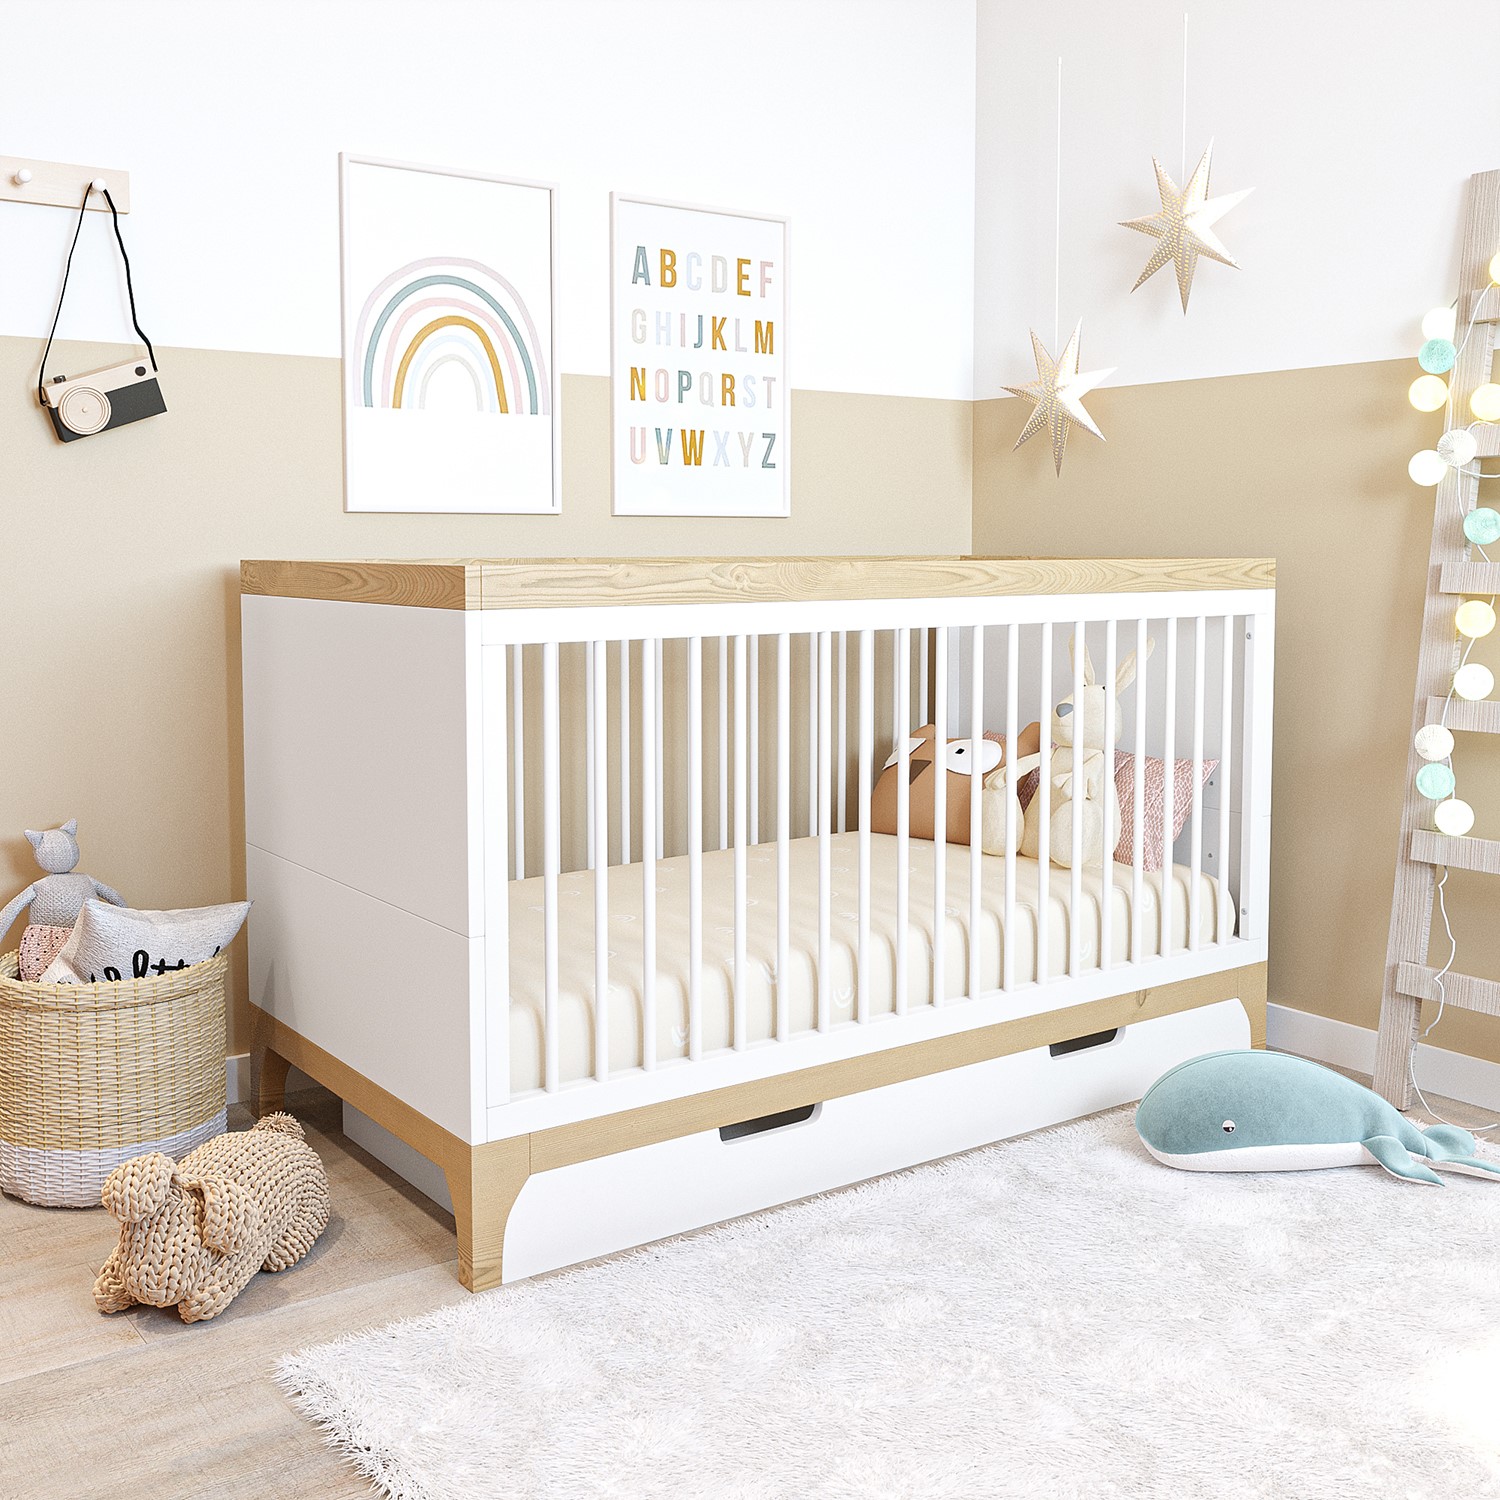 Read more about 3 piece nursery furniture set in white and pine rue